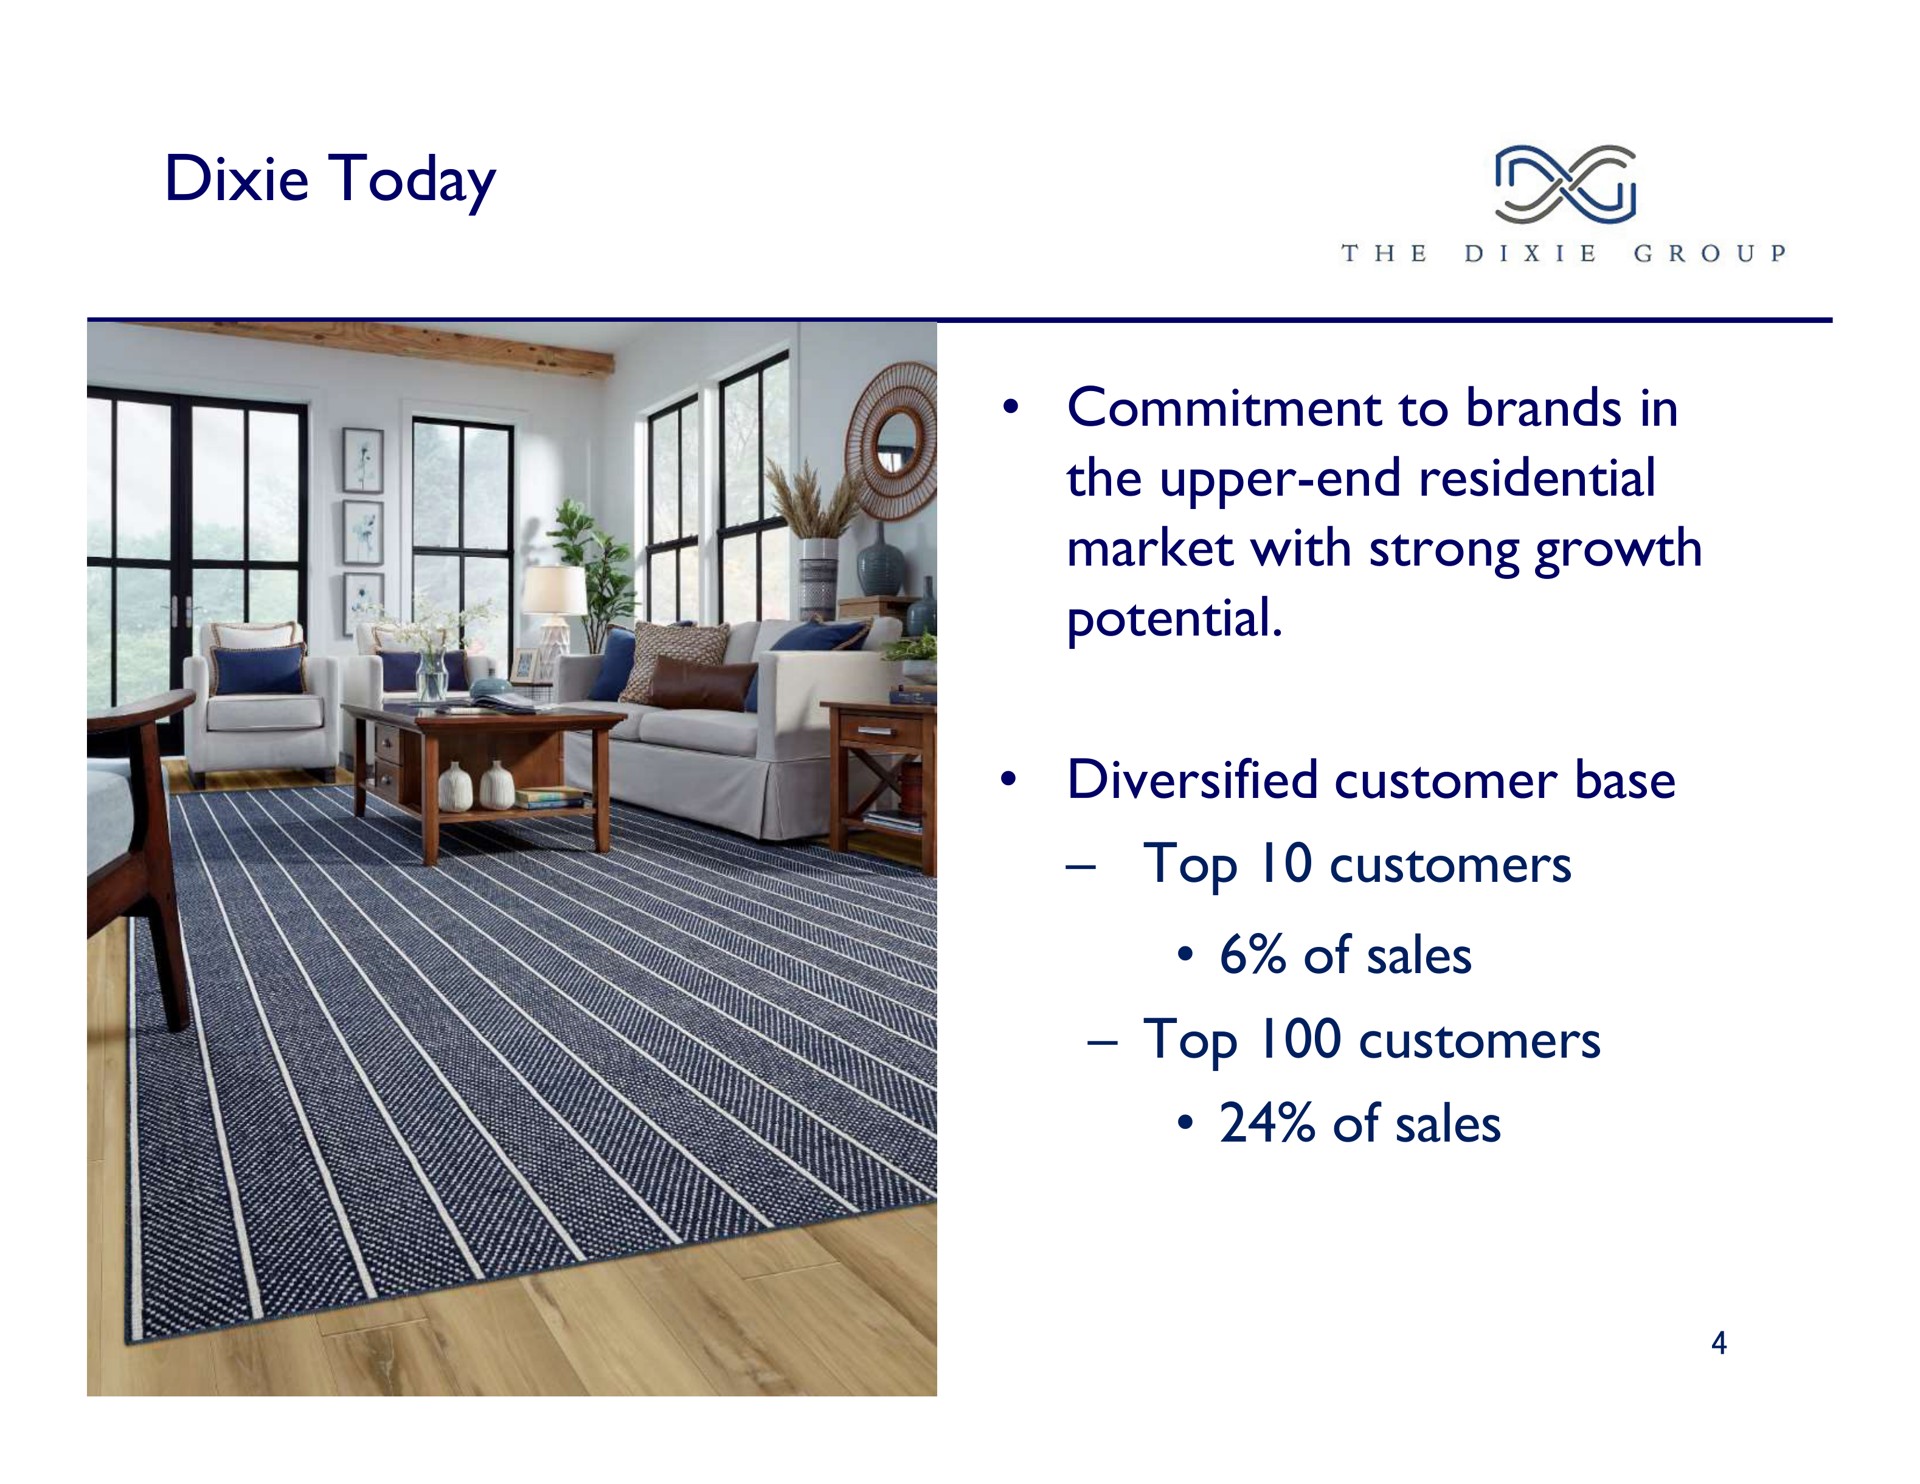 dixie today commitment to brands in the upper end residential market with strong growth potential top customers top customers of sales | The Dixie Group